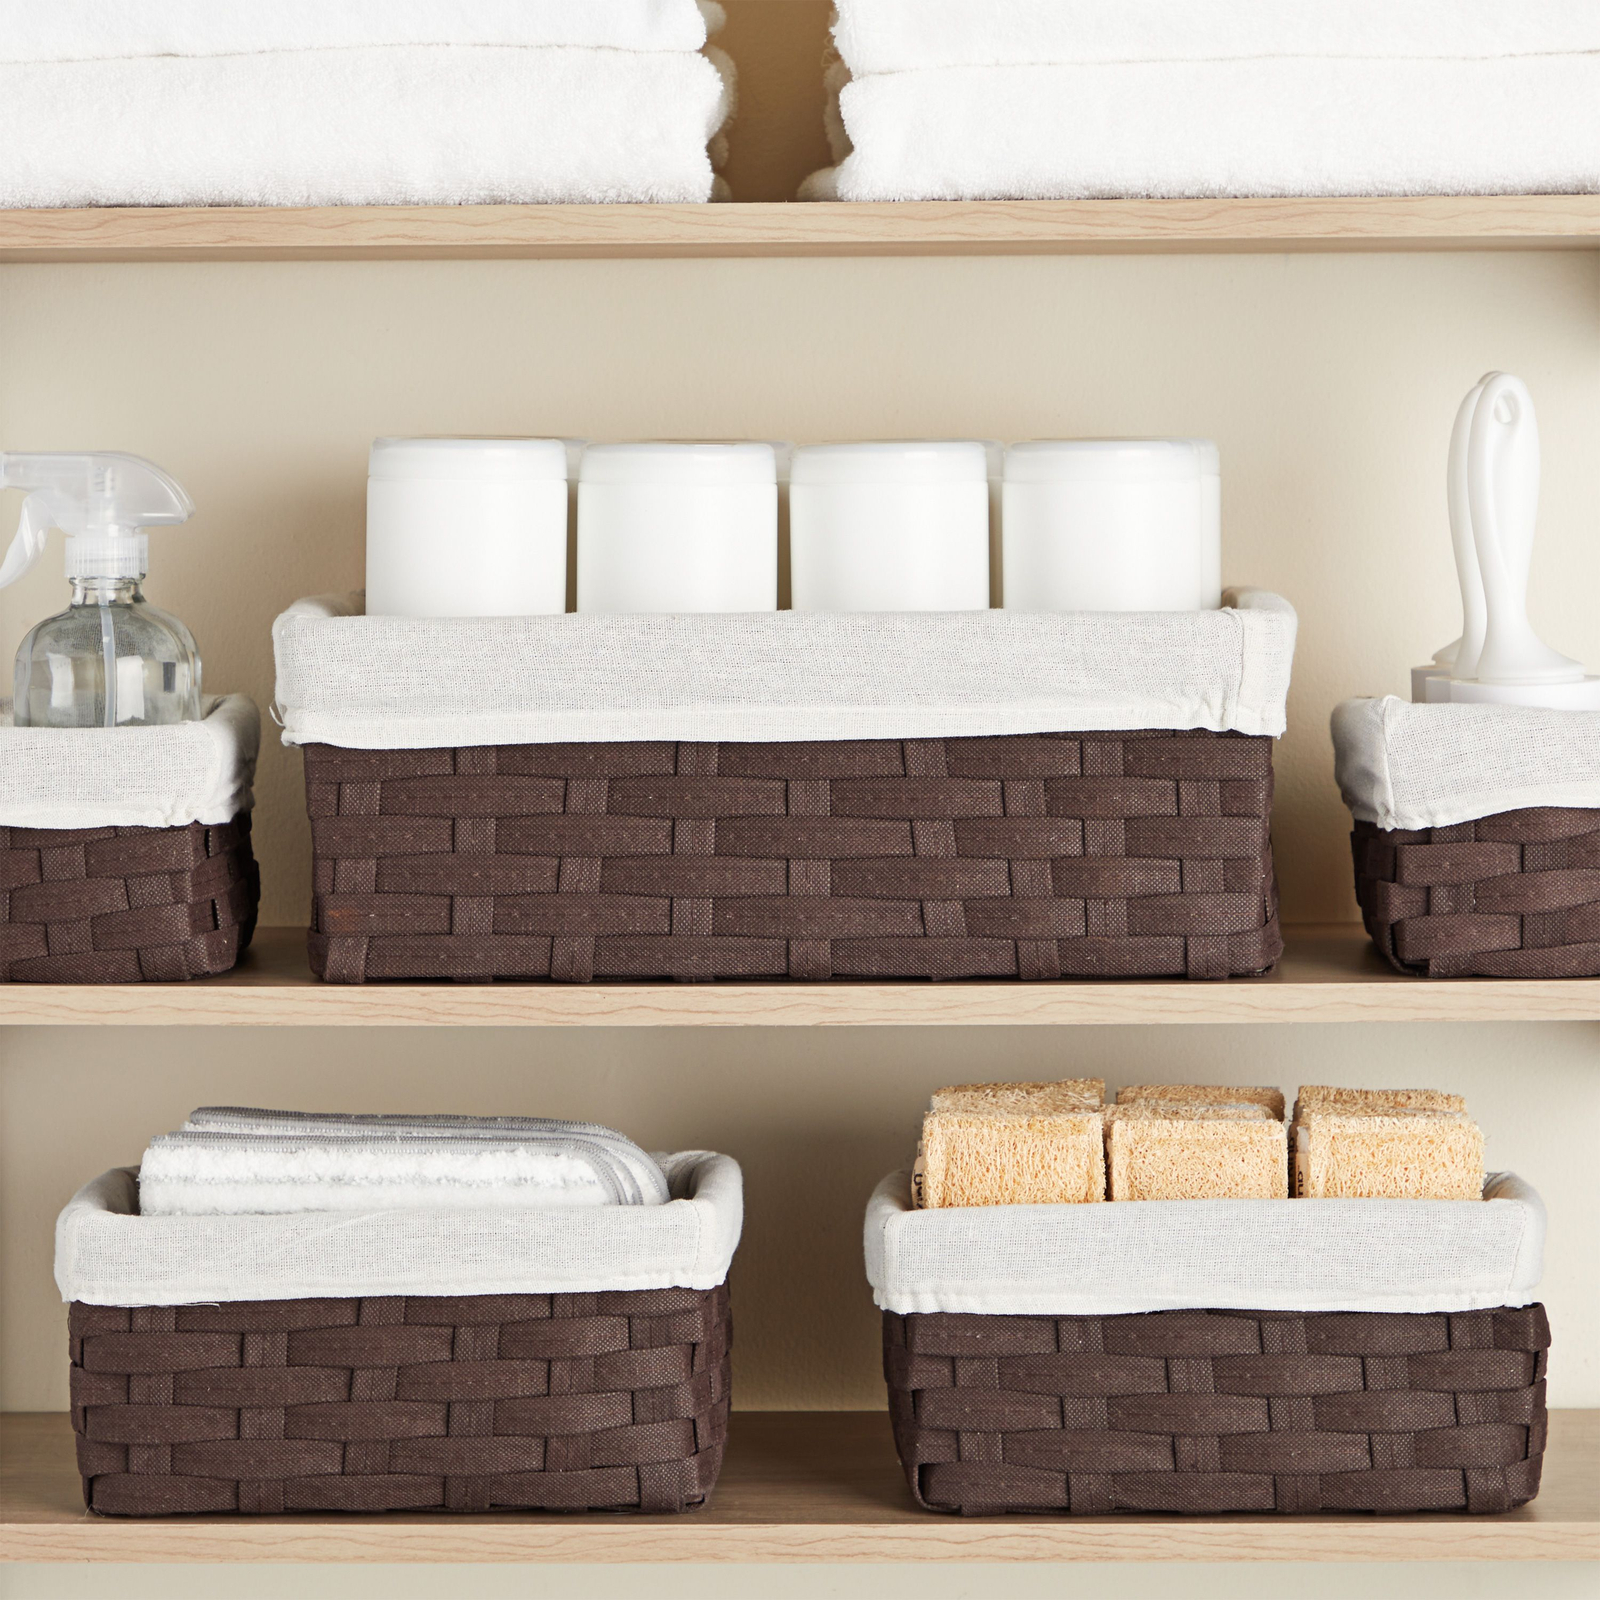 5 Pack Wicker Nesting Baskets with Cloth Lining for Pantry Shelves, Rectangular Storage Bins for Organizing Closet (Brown, 3 Sizes) - image 2 of 10